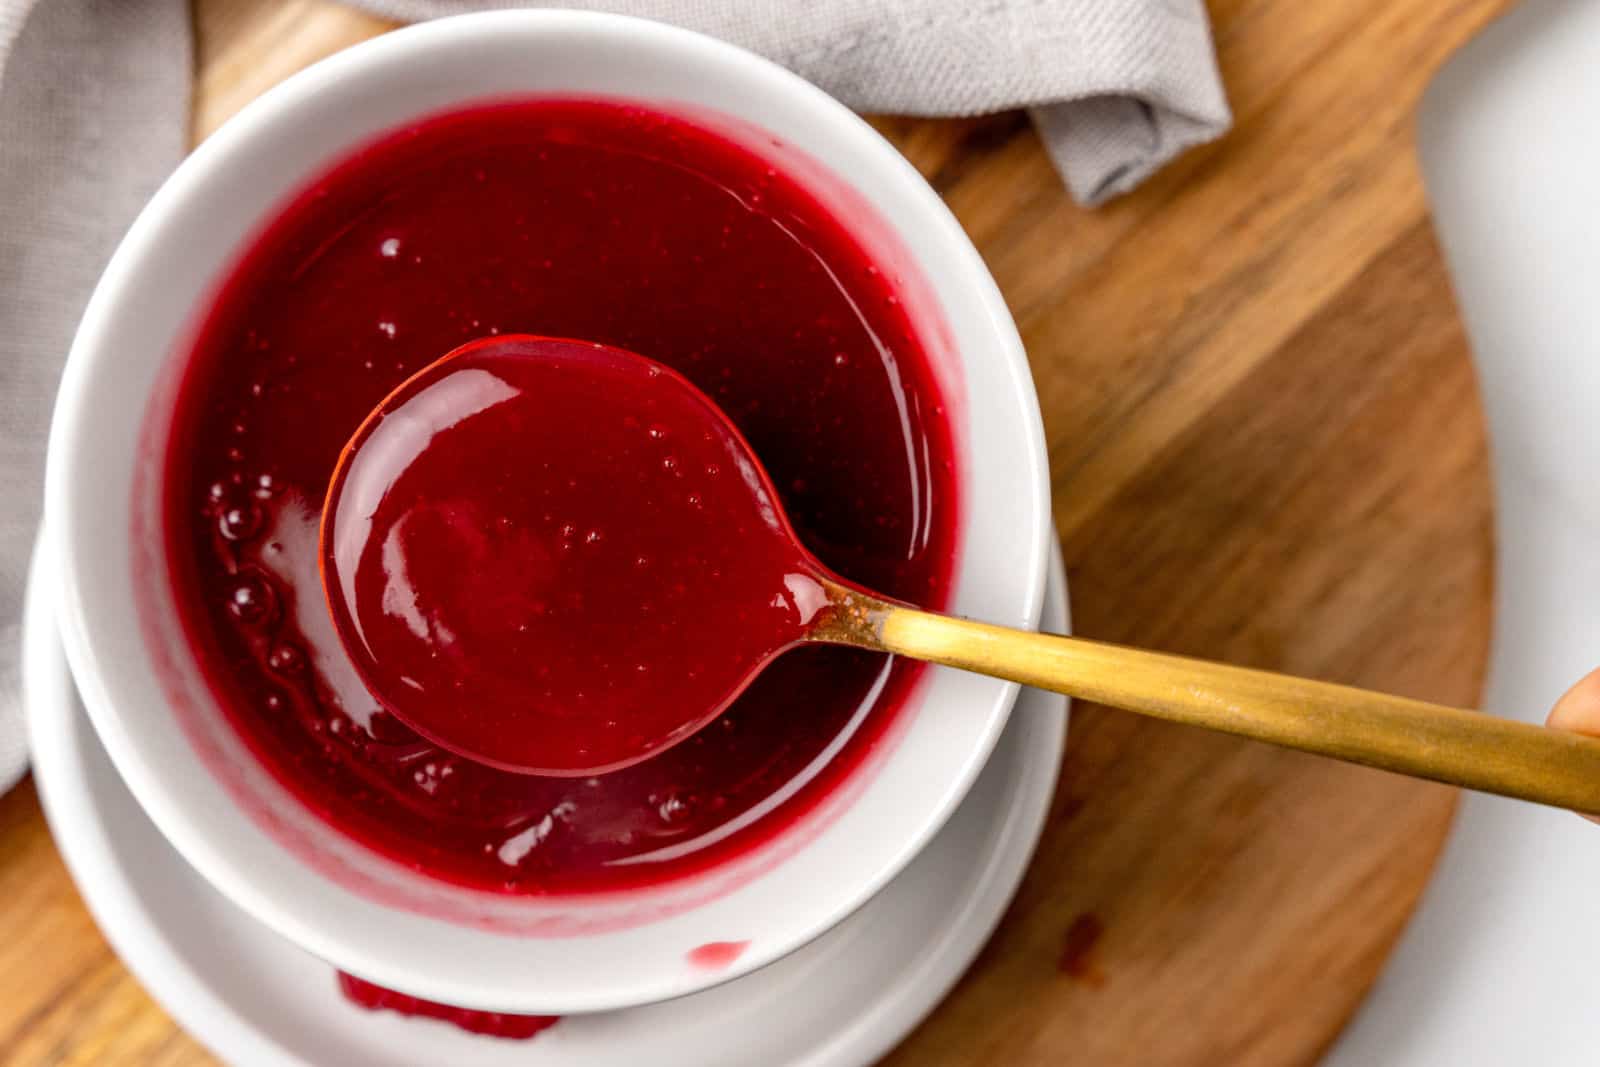 A bowl filled with red berry sauce. A golden spoon is partially submerged in the sauce, resting on the edge of the bowl.